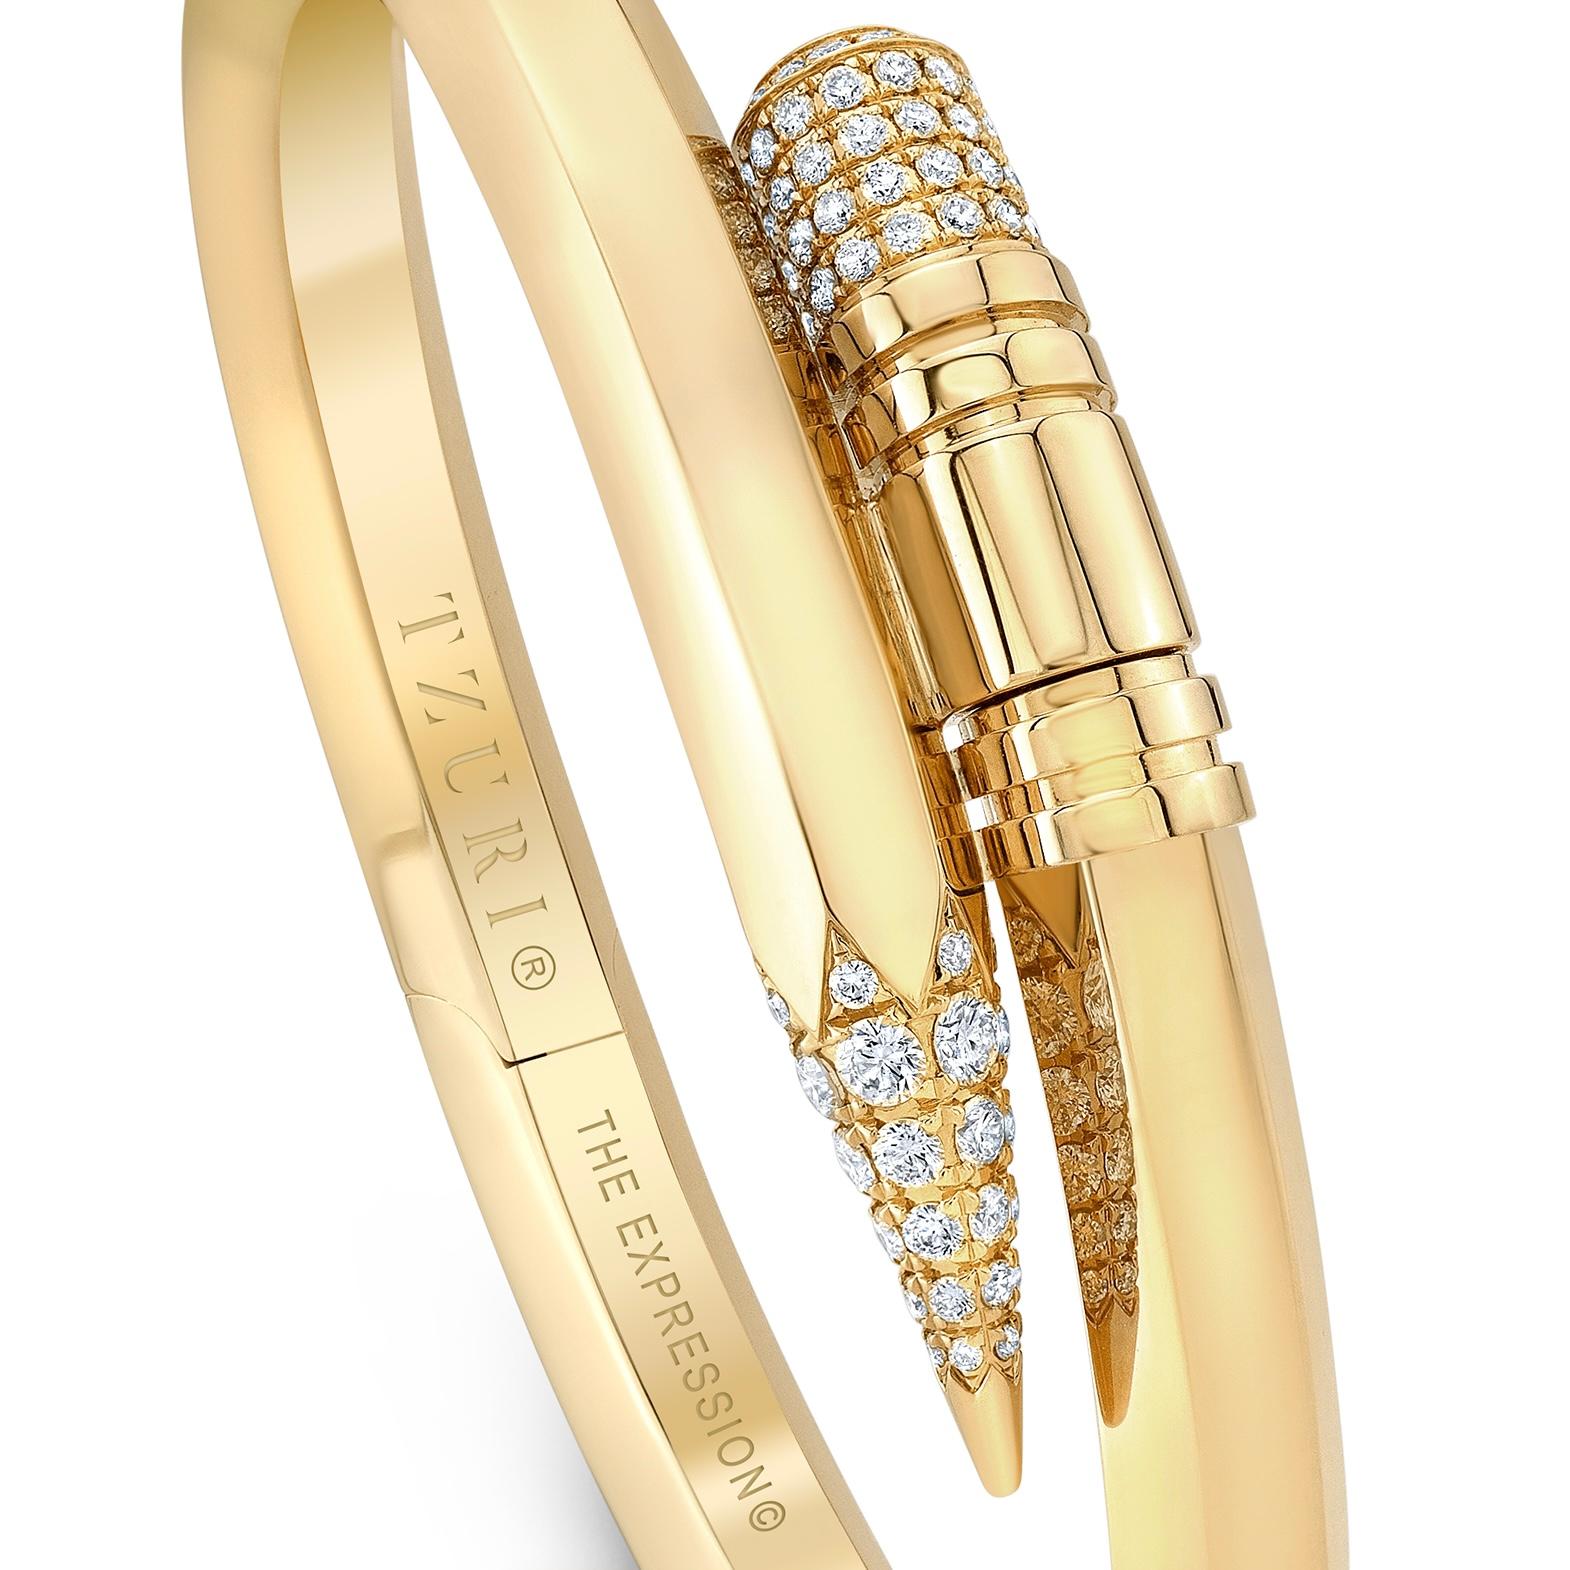 18k Yellow Gold Large Expression Bracelet

6.5 mm Gauge Thickness

Weight: 1.15 ct (approx.)

Color: F-G
Clarity: VS+

Bracelets are produced in limited editions of 500 units, per design, annually. They are engraved with the serial number and